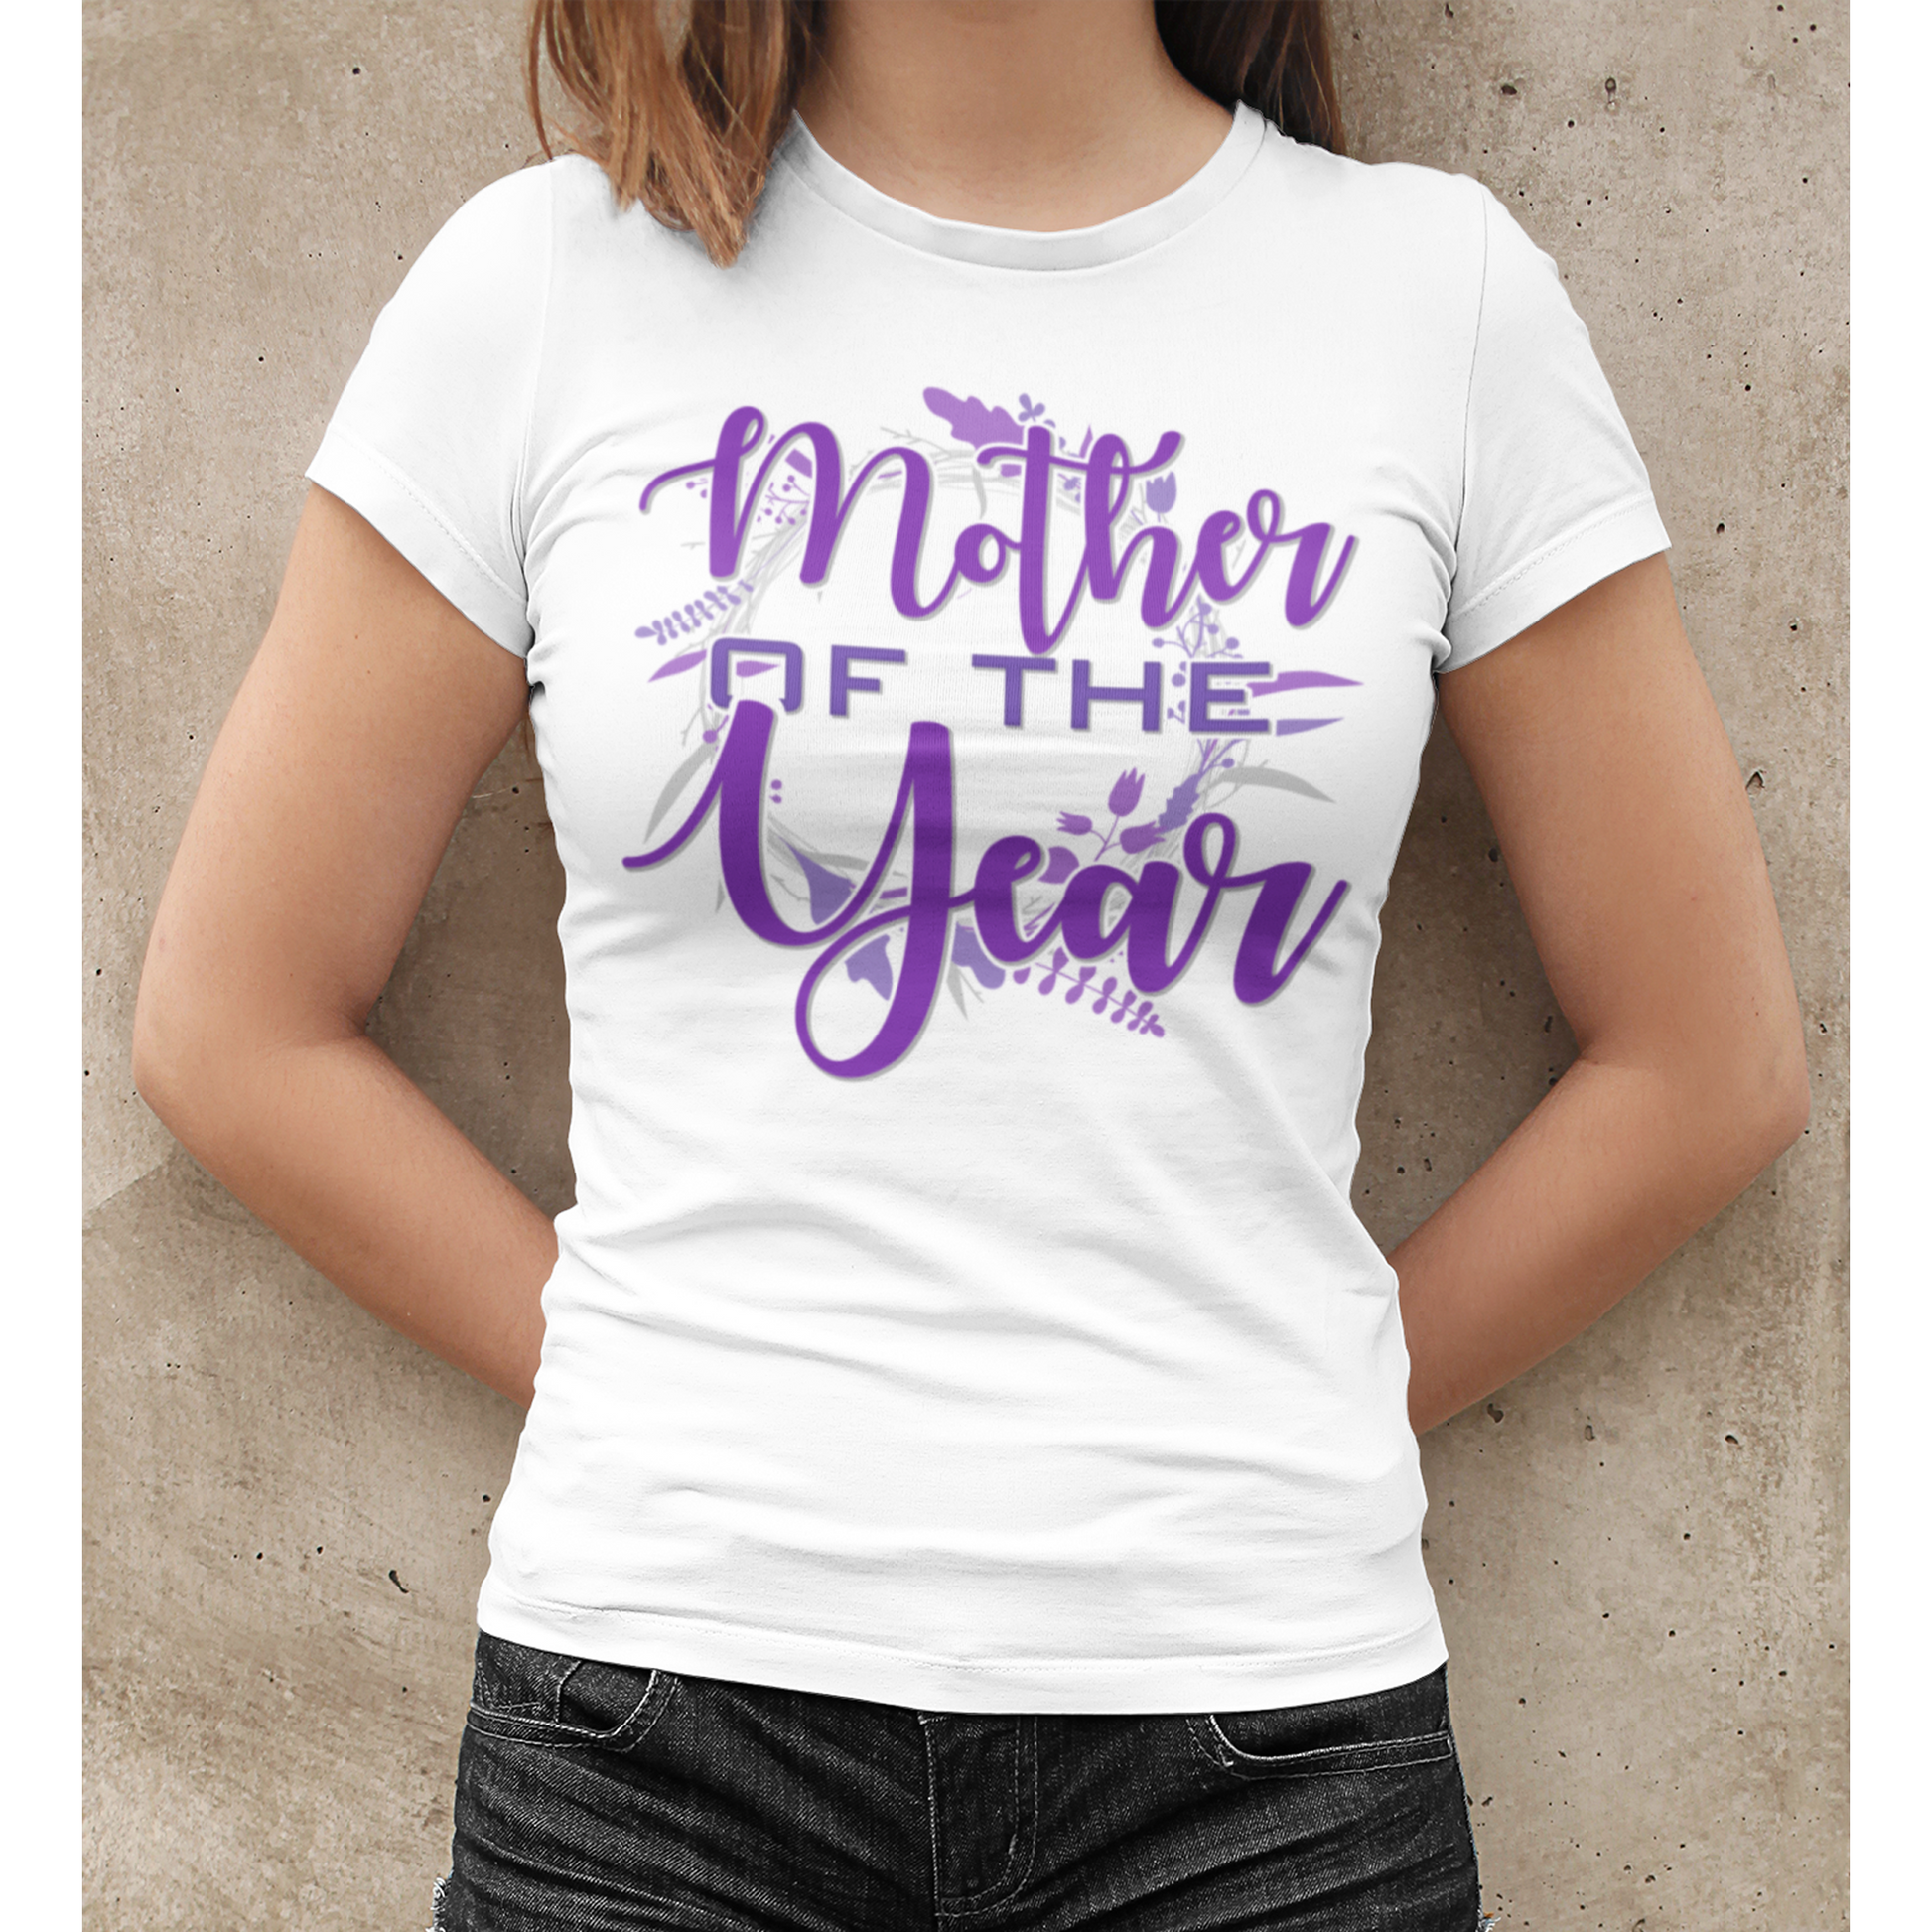 Mother of the Year T-Shirt - Wilson Design Group